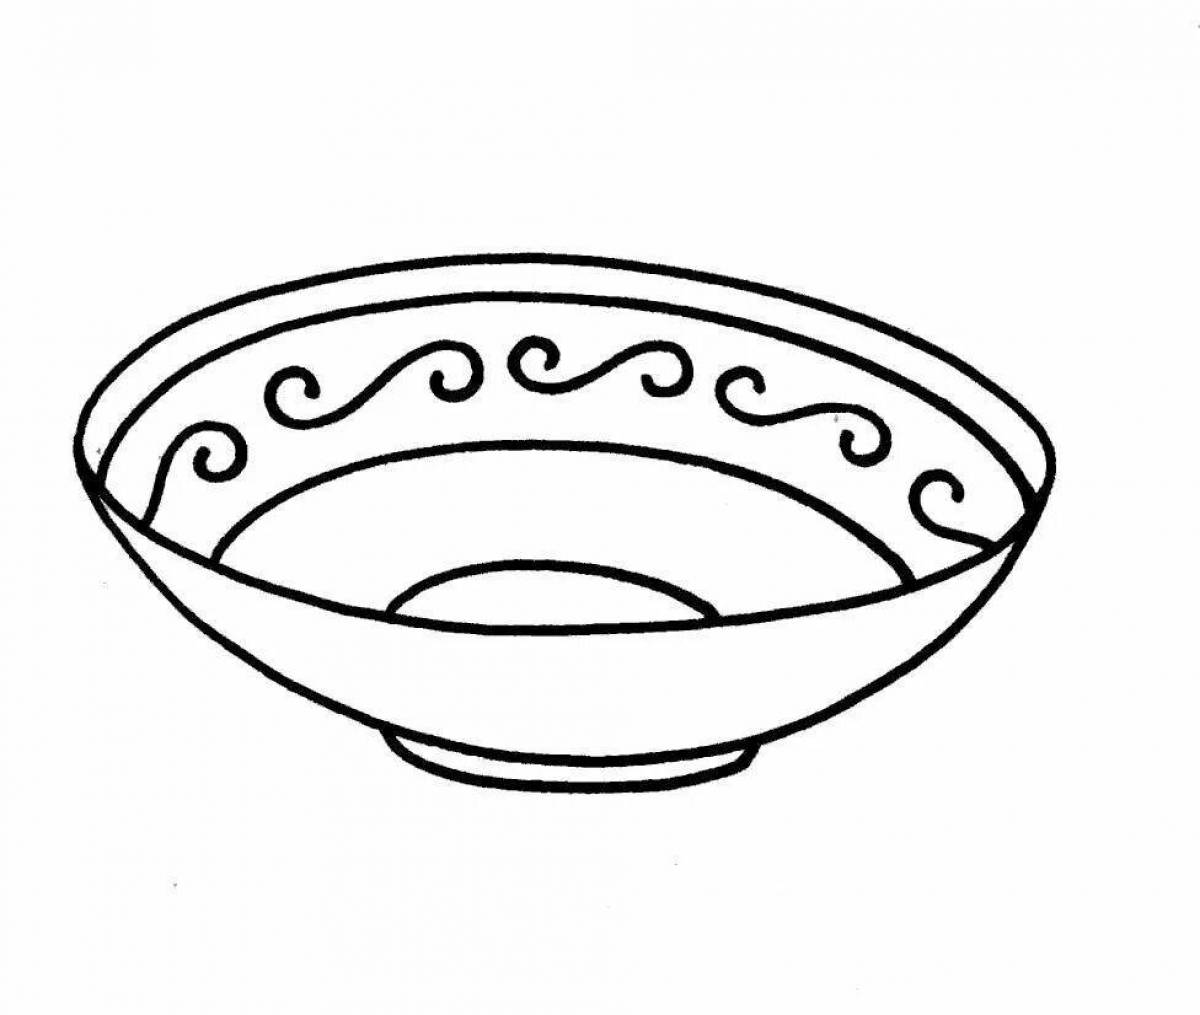 Blessed bowl coloring page for kids